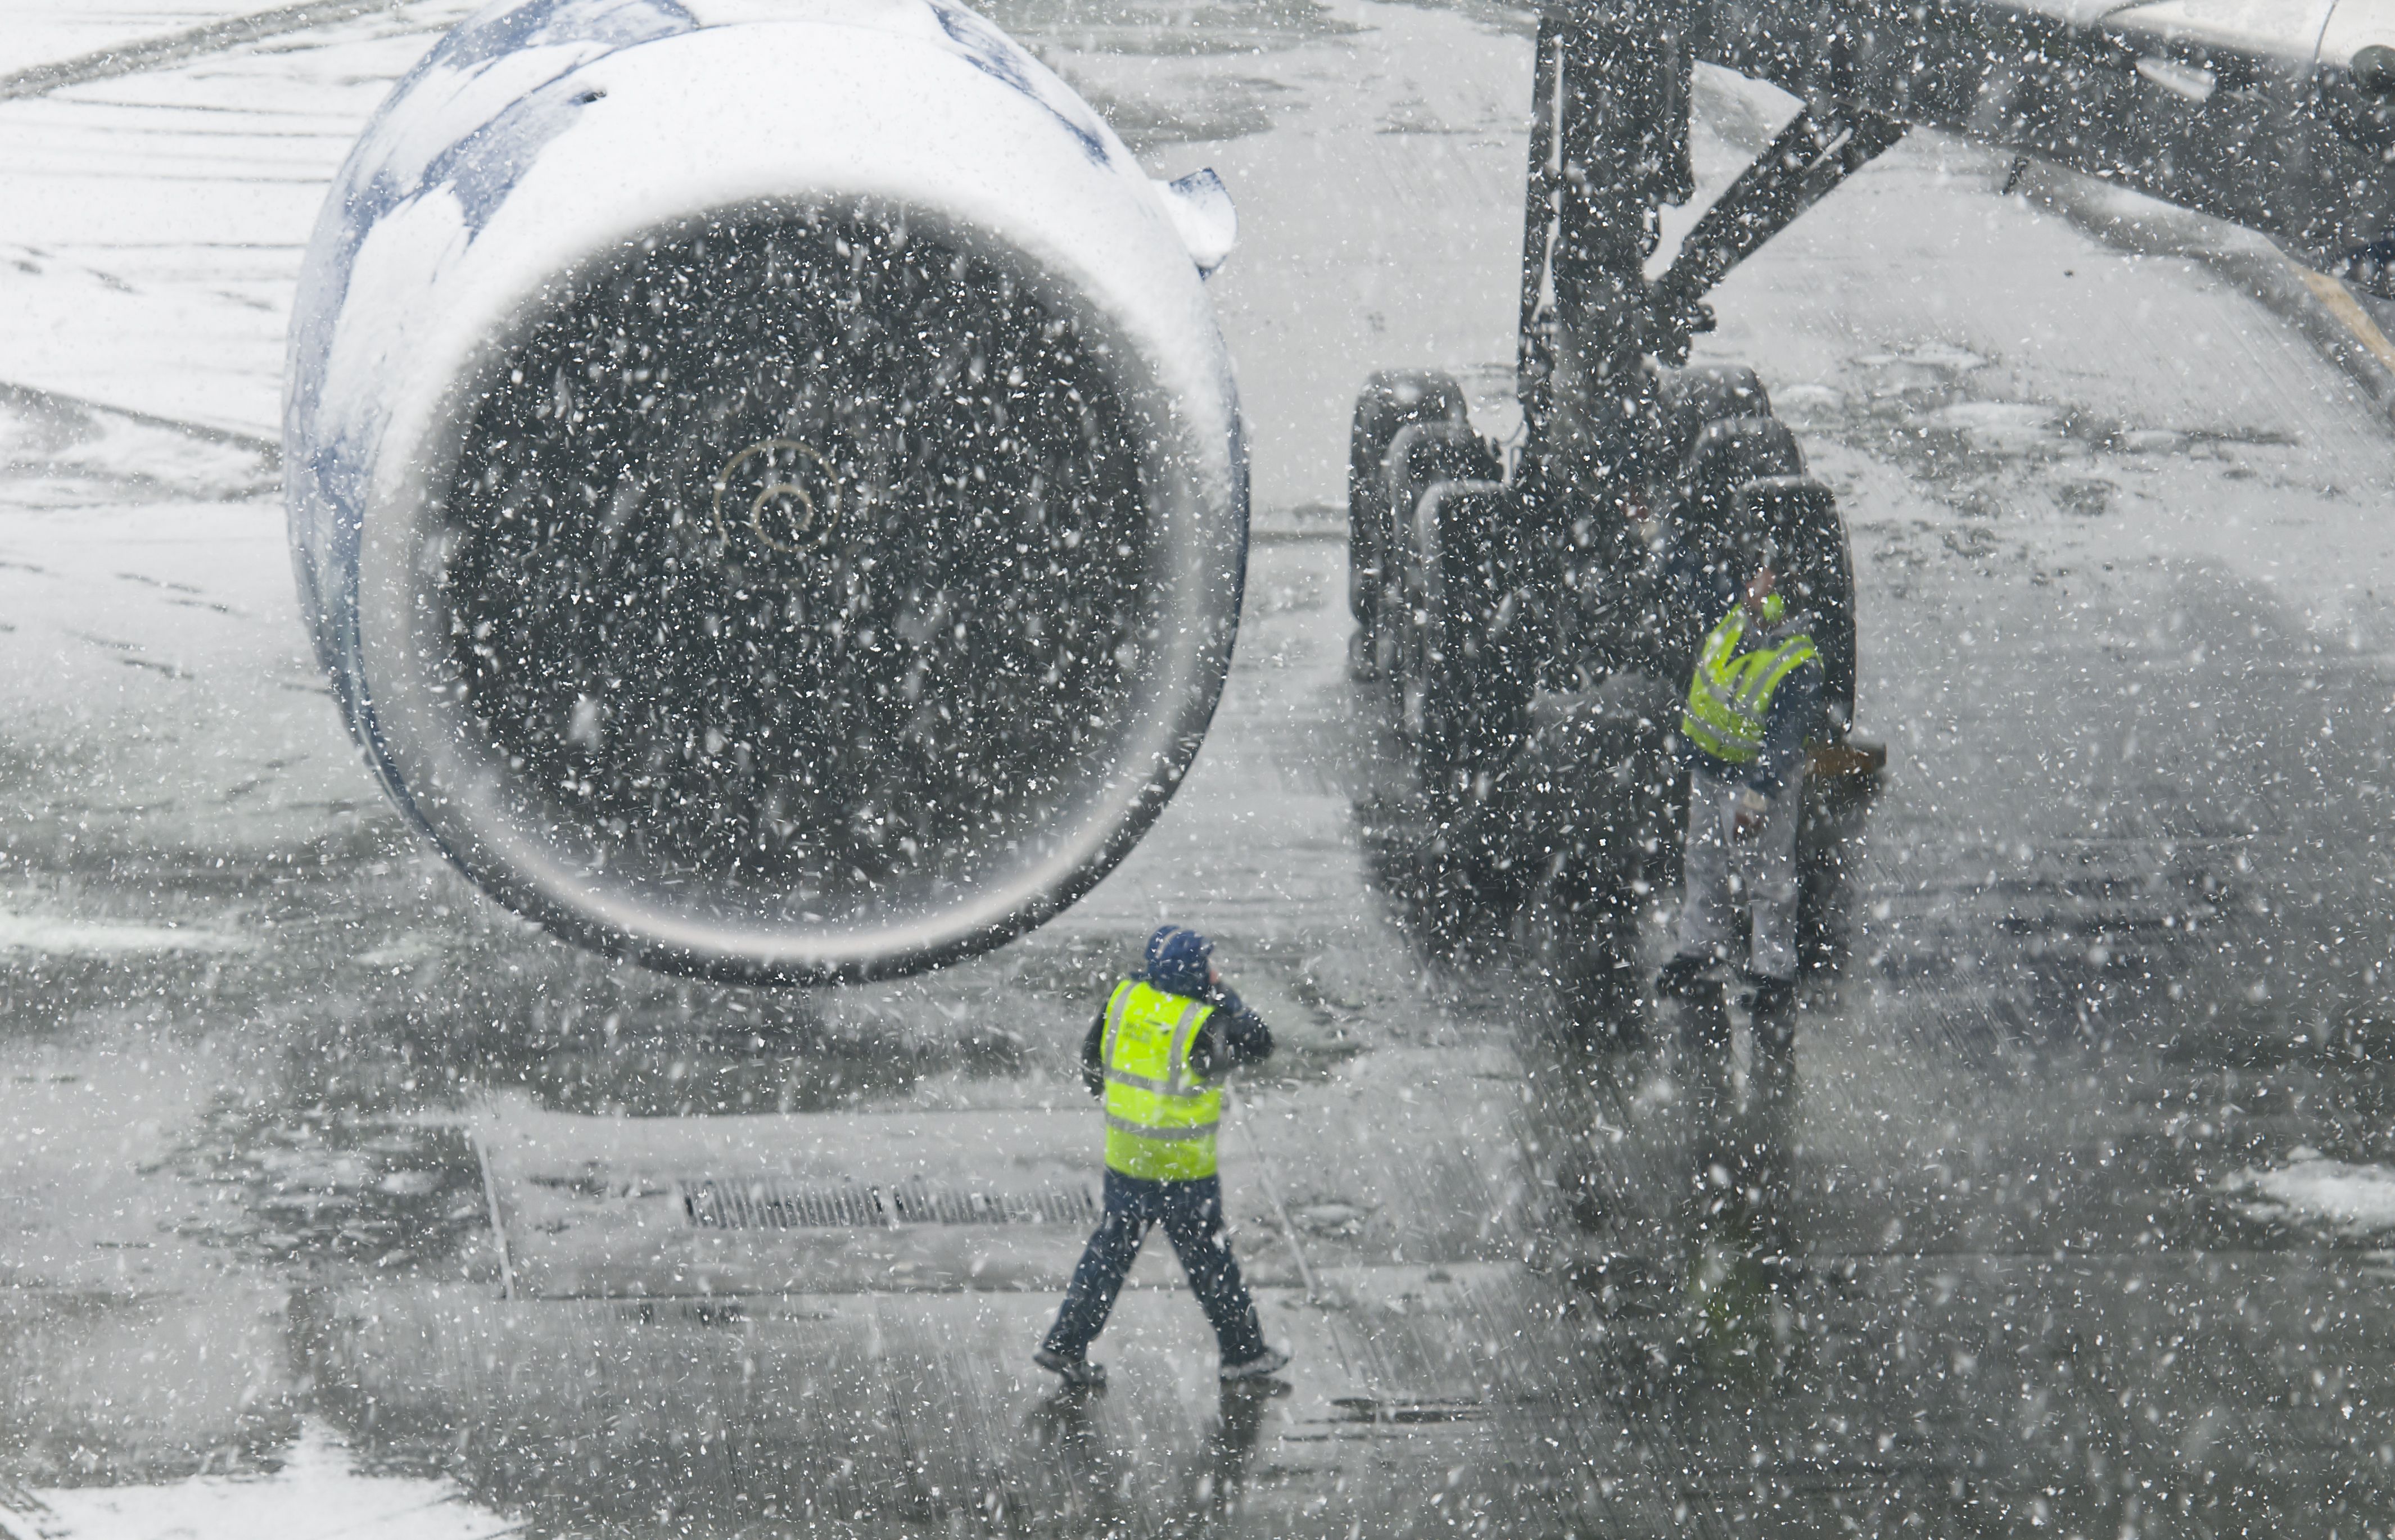 A snowy day that might require a reserve crew to be used if the weather causes significant delays.